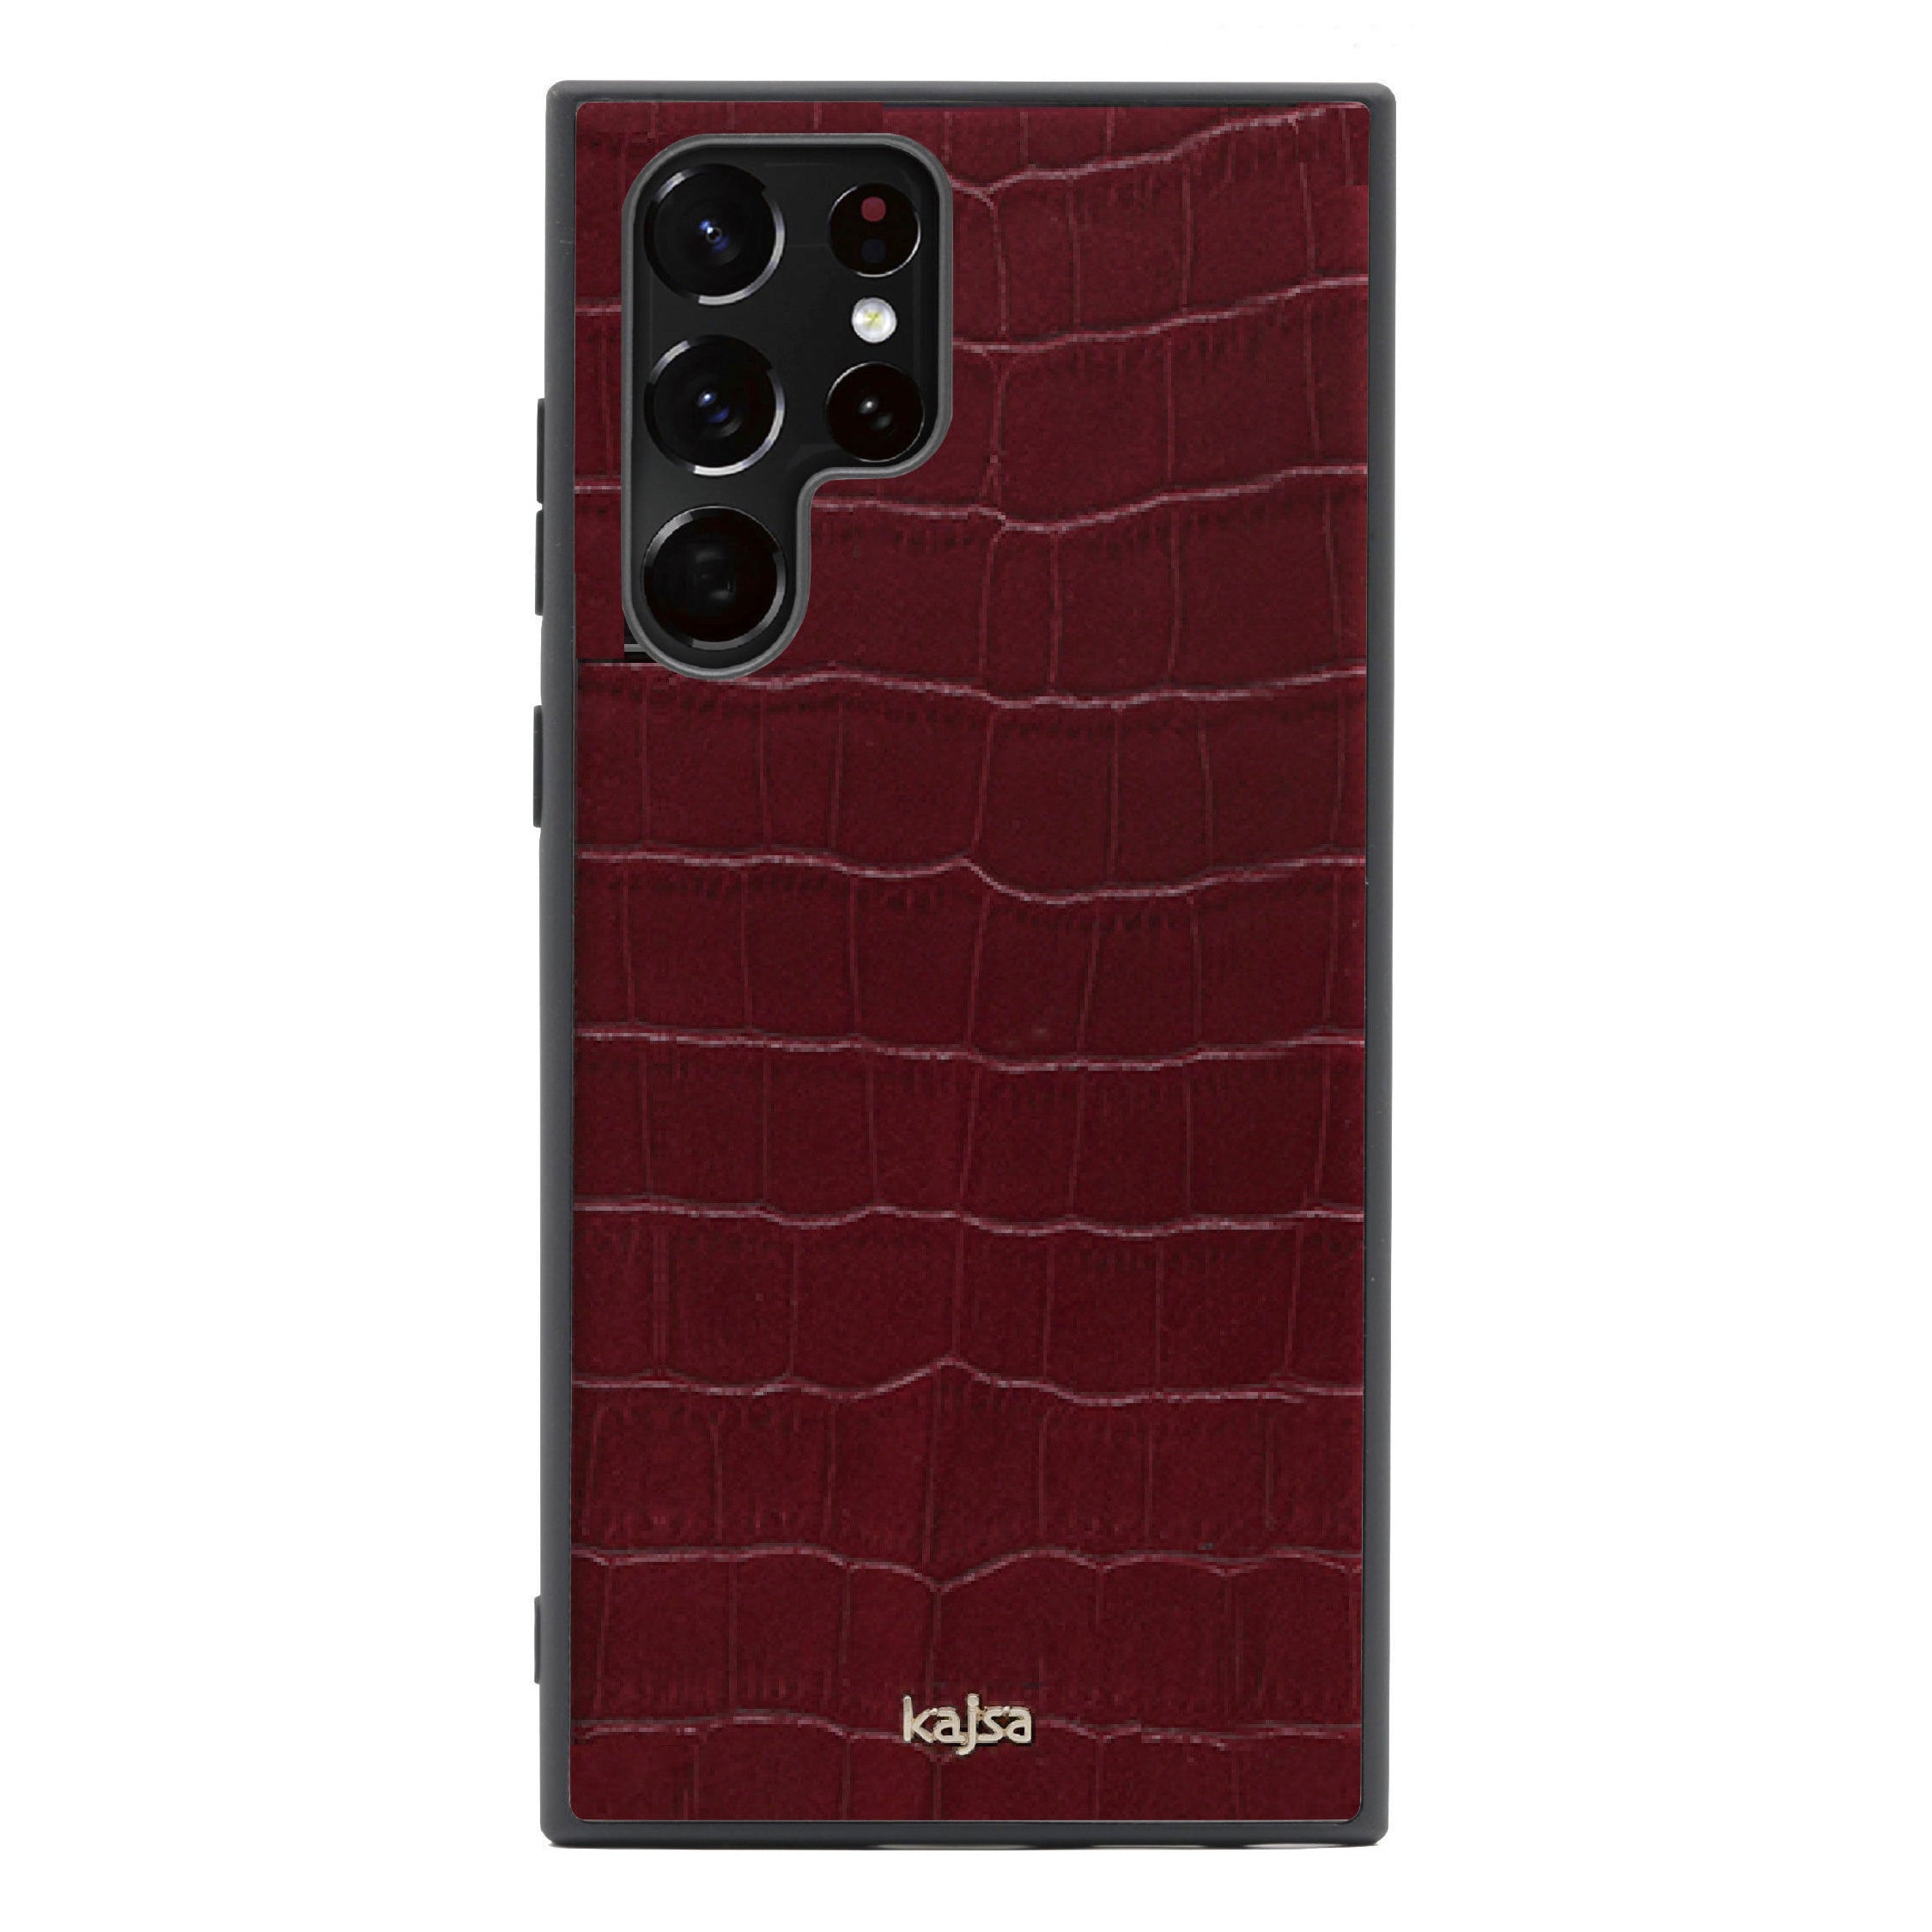 Neo Classic Collection - Genuine Croco Pattern Leather Back Case for Samsung Galaxy S22/S22+/S22 Ultra-Phone Case- phone case - phone cases- phone cover- iphone cover- iphone case- iphone cases- leather case- leather cases- DIYCASE - custom case - leather cover - hand strap case - croco pattern case - snake pattern case - carbon fiber phone case - phone case brand - unique phone case - high quality - phone case brand - protective case - buy phone case hong kong - online buy phone case - iphone‎手機殼 - 客製化手機殼 